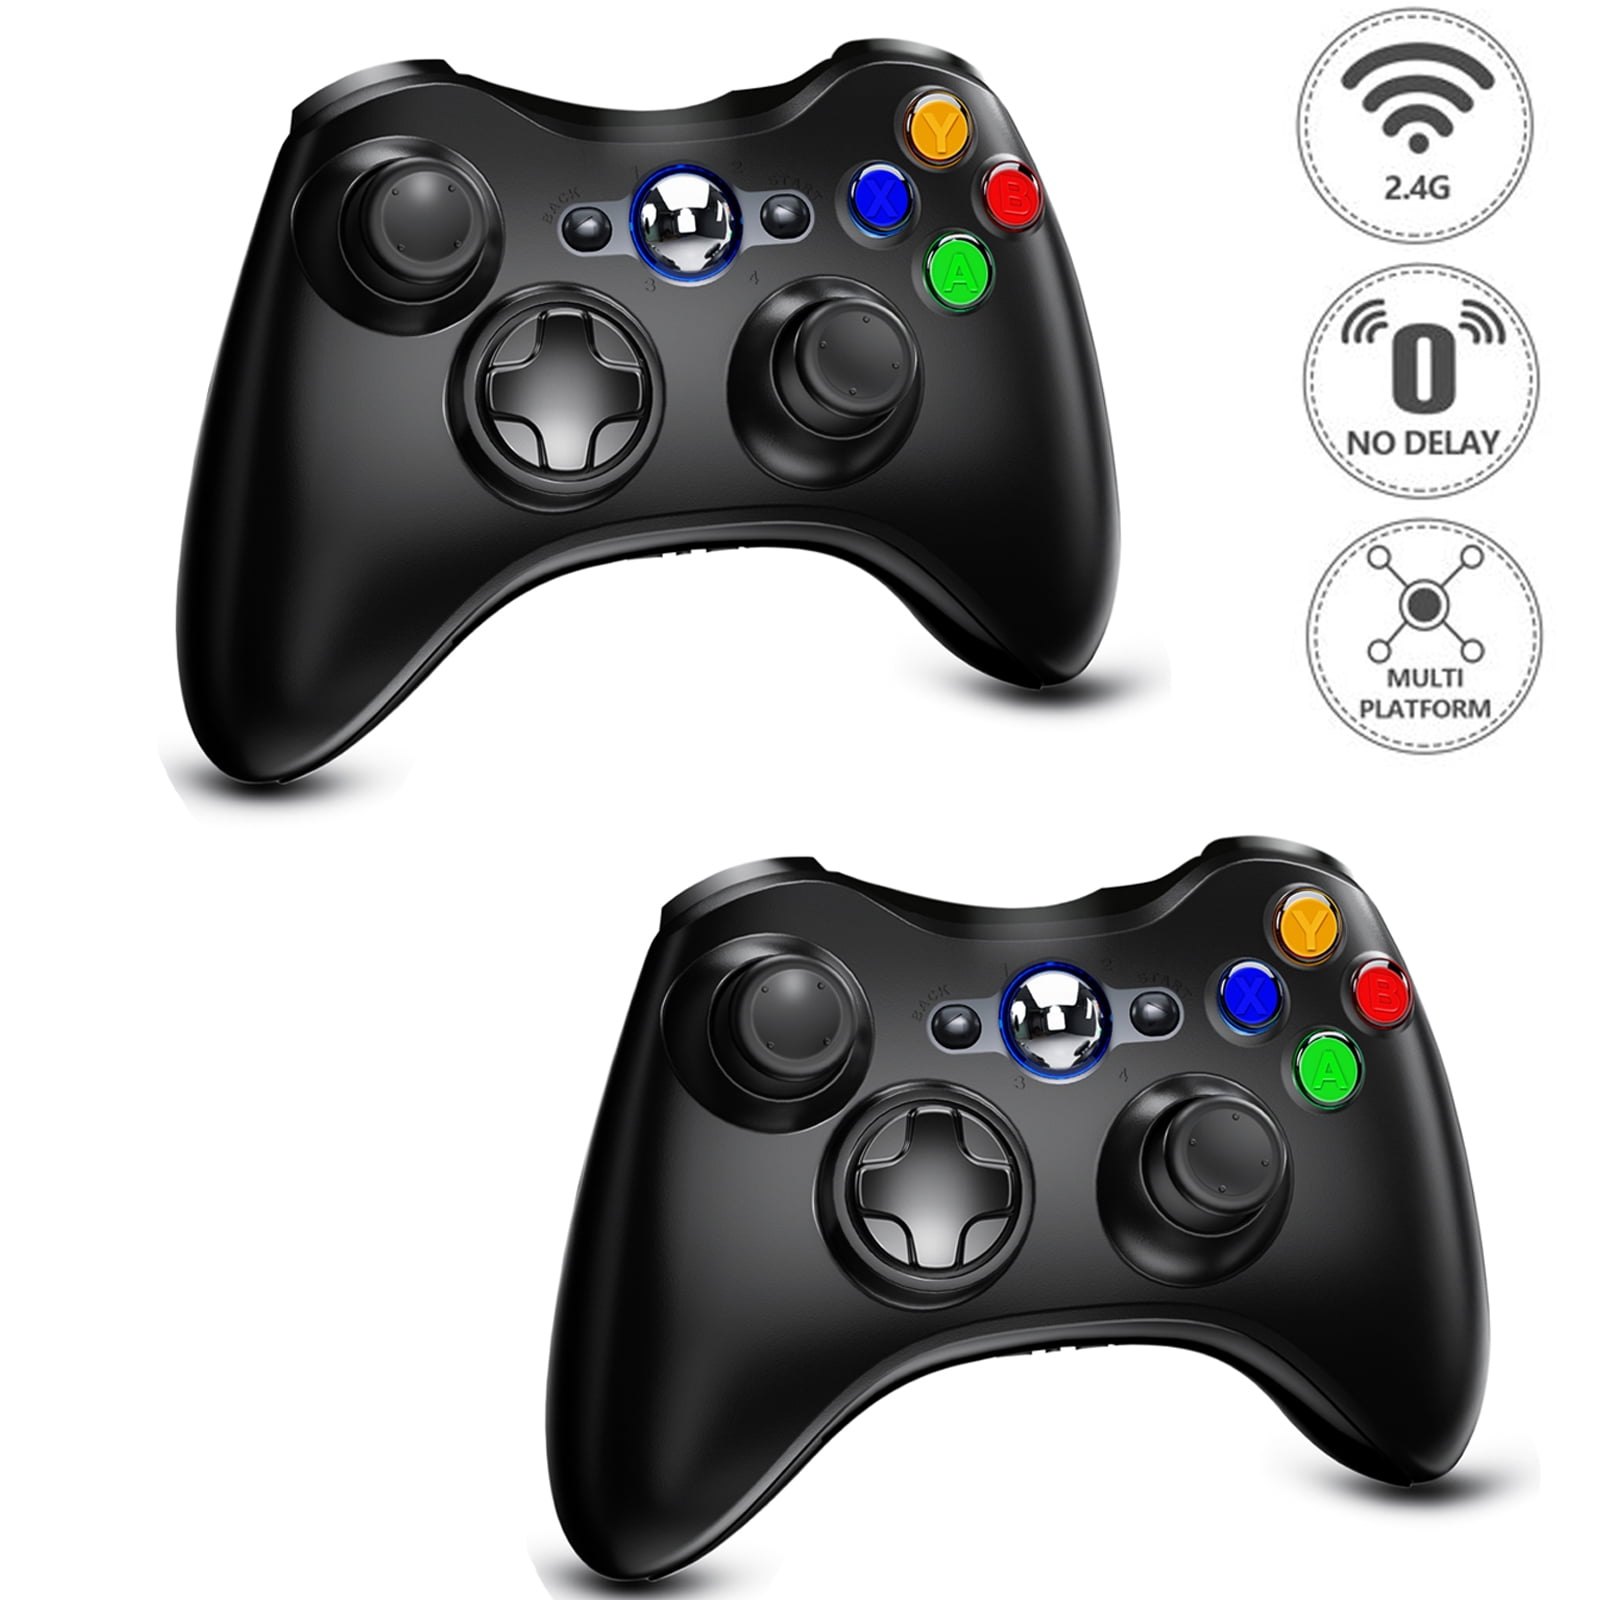 Bonadget Xbox 360 Controller, Wireless Controller for Xbox 360, 2.4GHZ Game  Joystick Controller Gamepad Remote Compatible with Xbox 360/360 Slim, PC